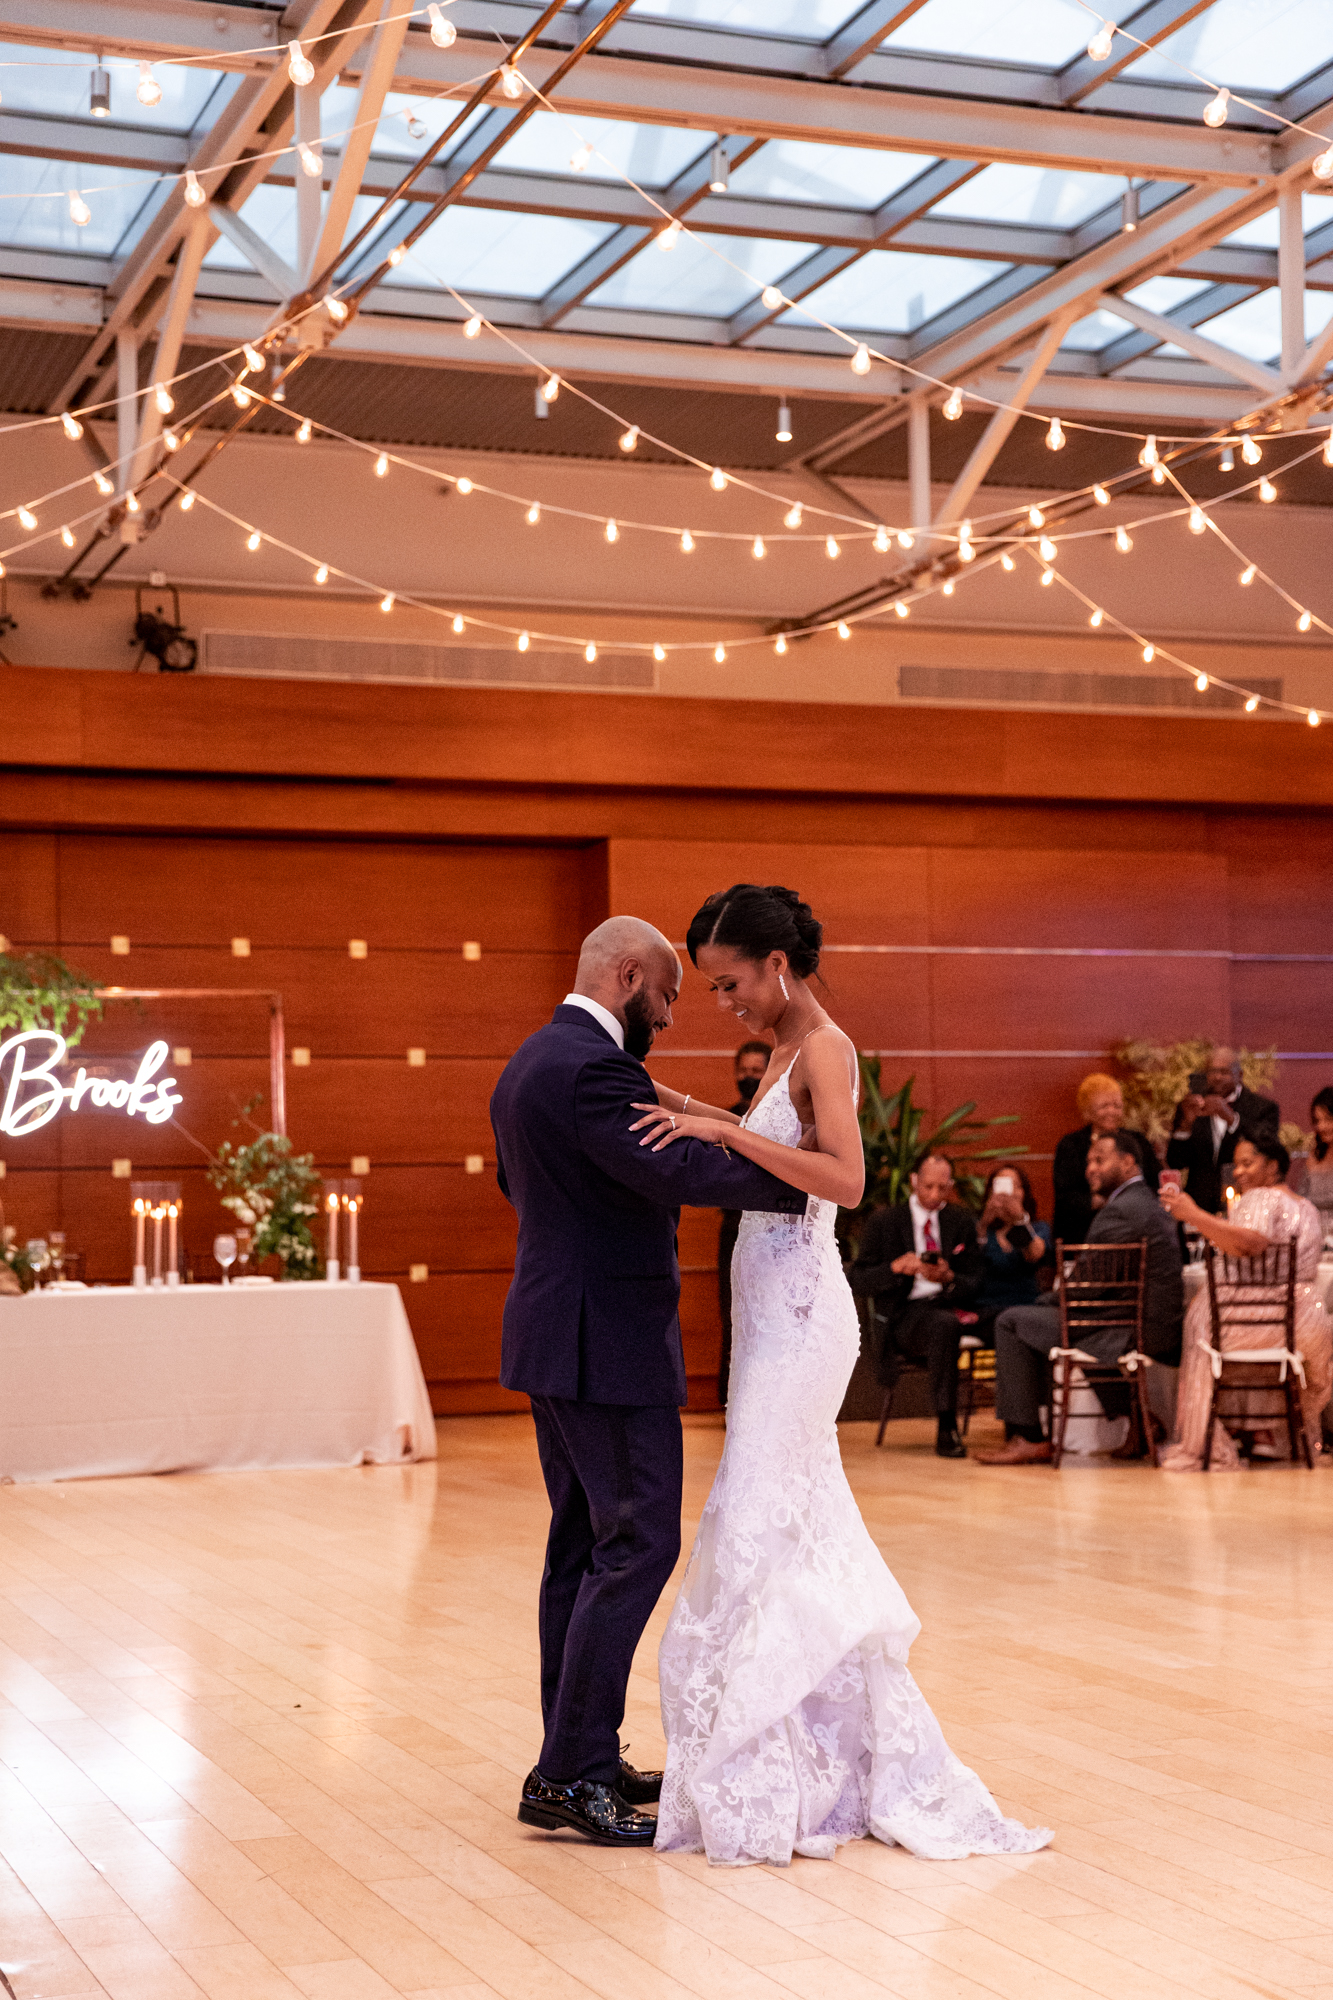 bride and groom first dance at a kimmel center wedding reception